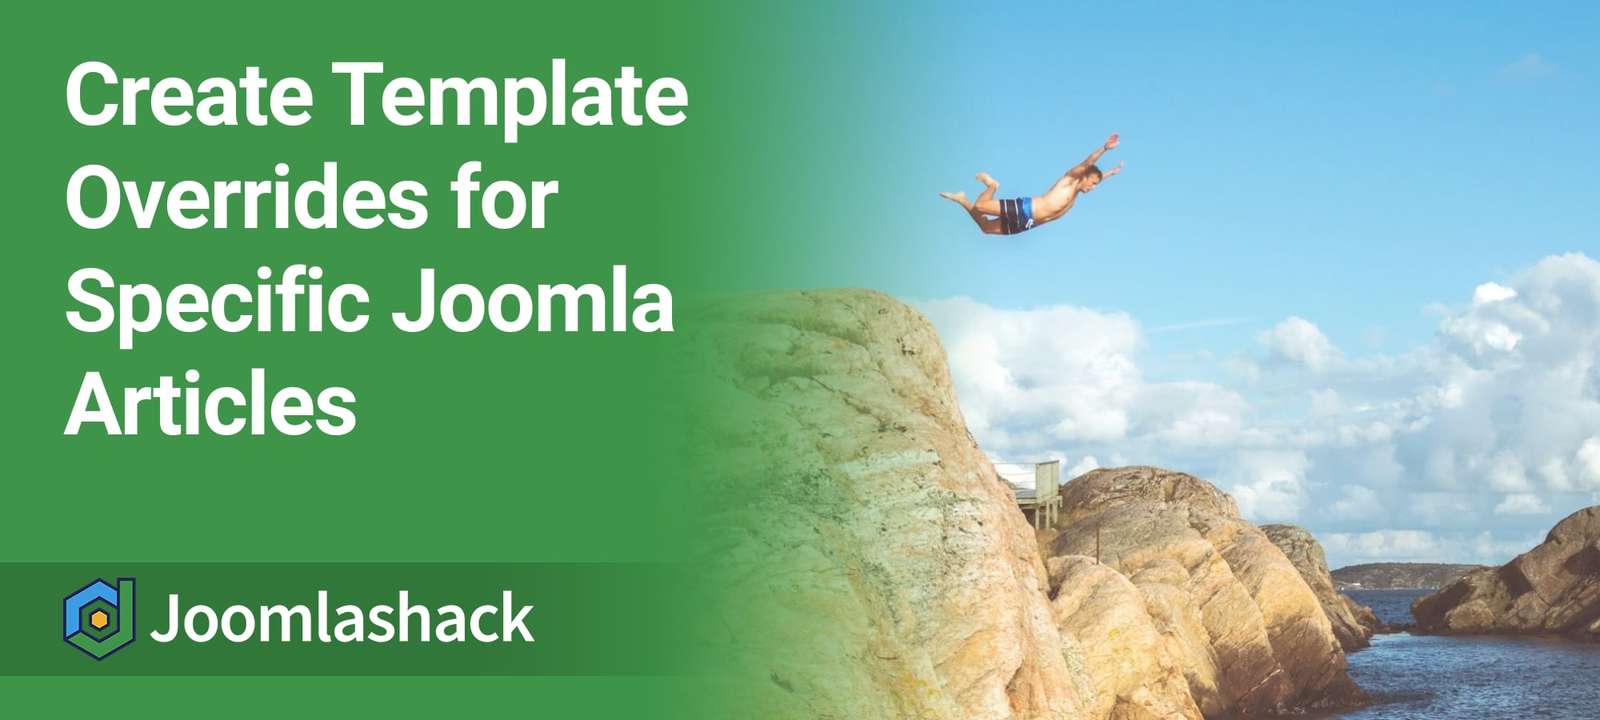 Create Template Overrides for Specific Joomla Articles